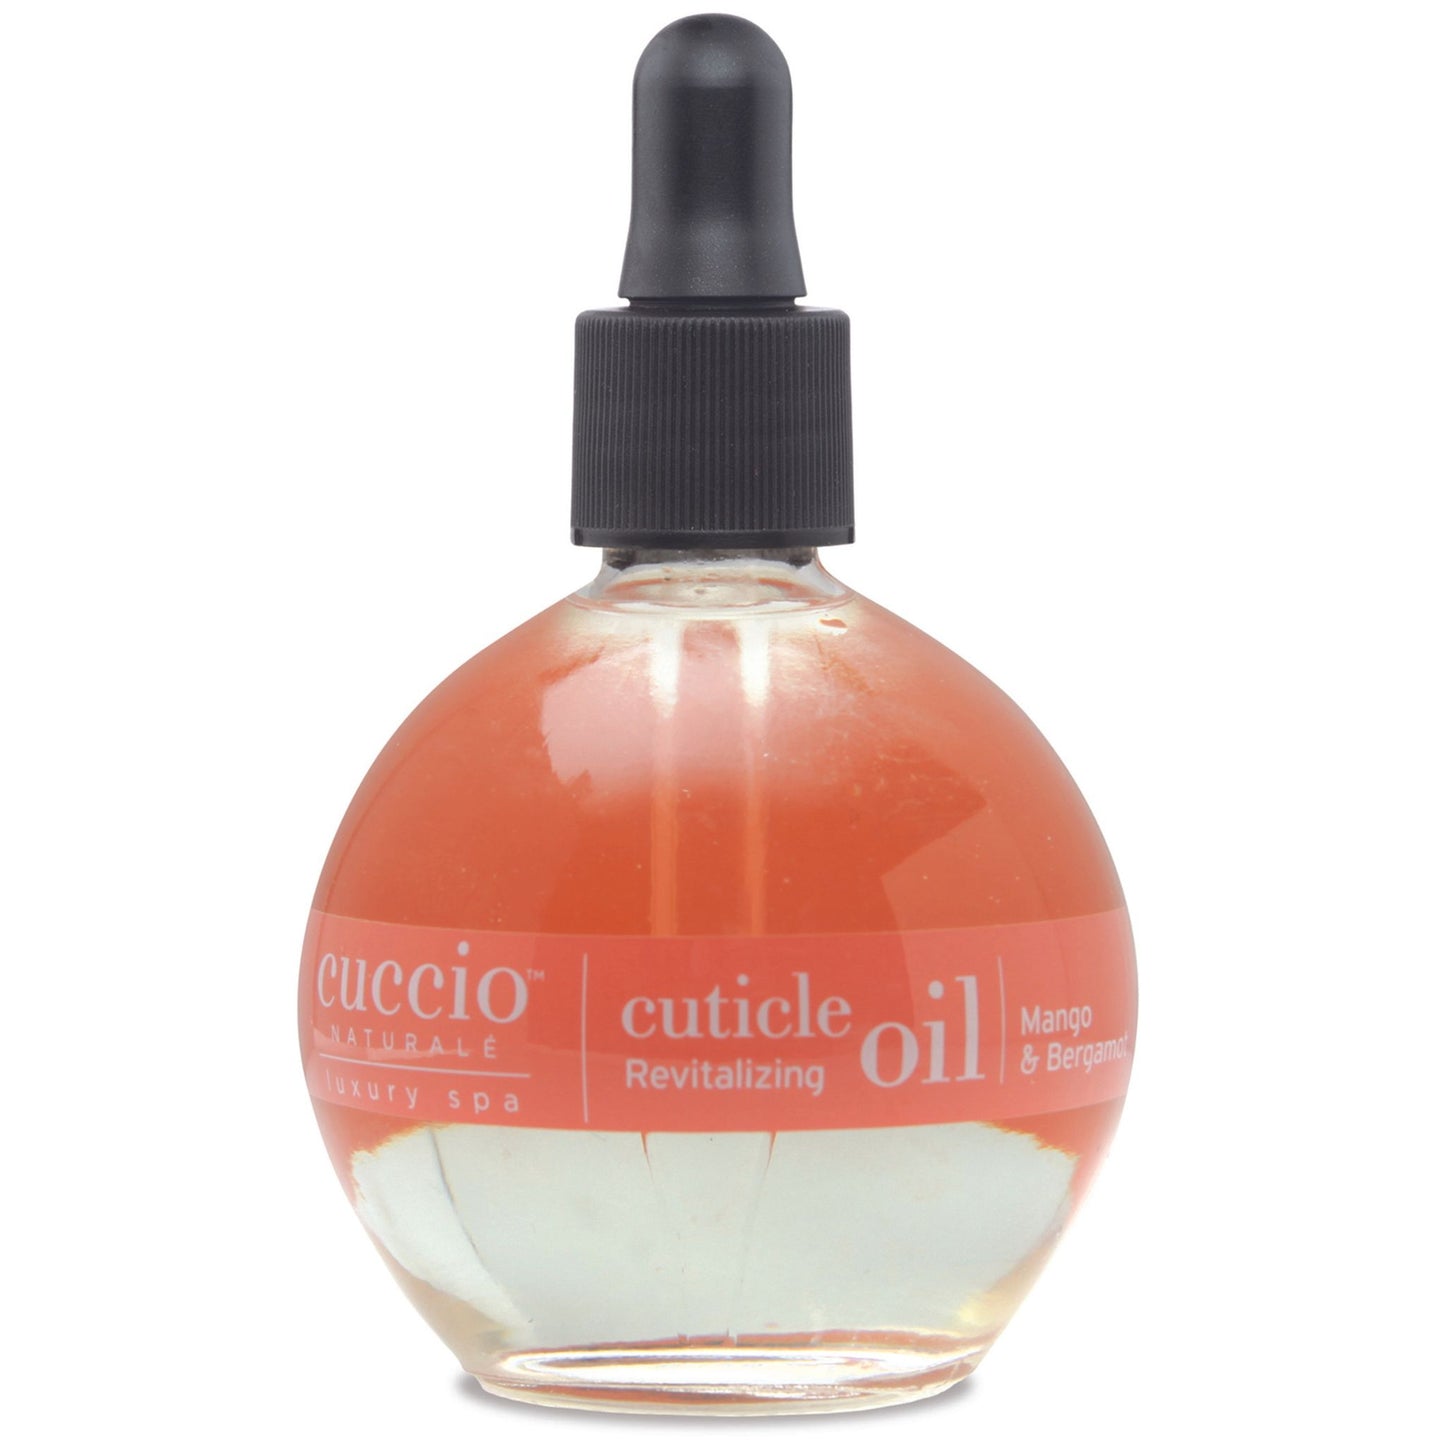 Purchase one (2.5 oz.) cuticle oil and get the same scent Dry Body Oil (3.38 fl. oz.) FREE!-Mango & Bergamot: Dry Body Oil + Cuticle Oil BUNDLE